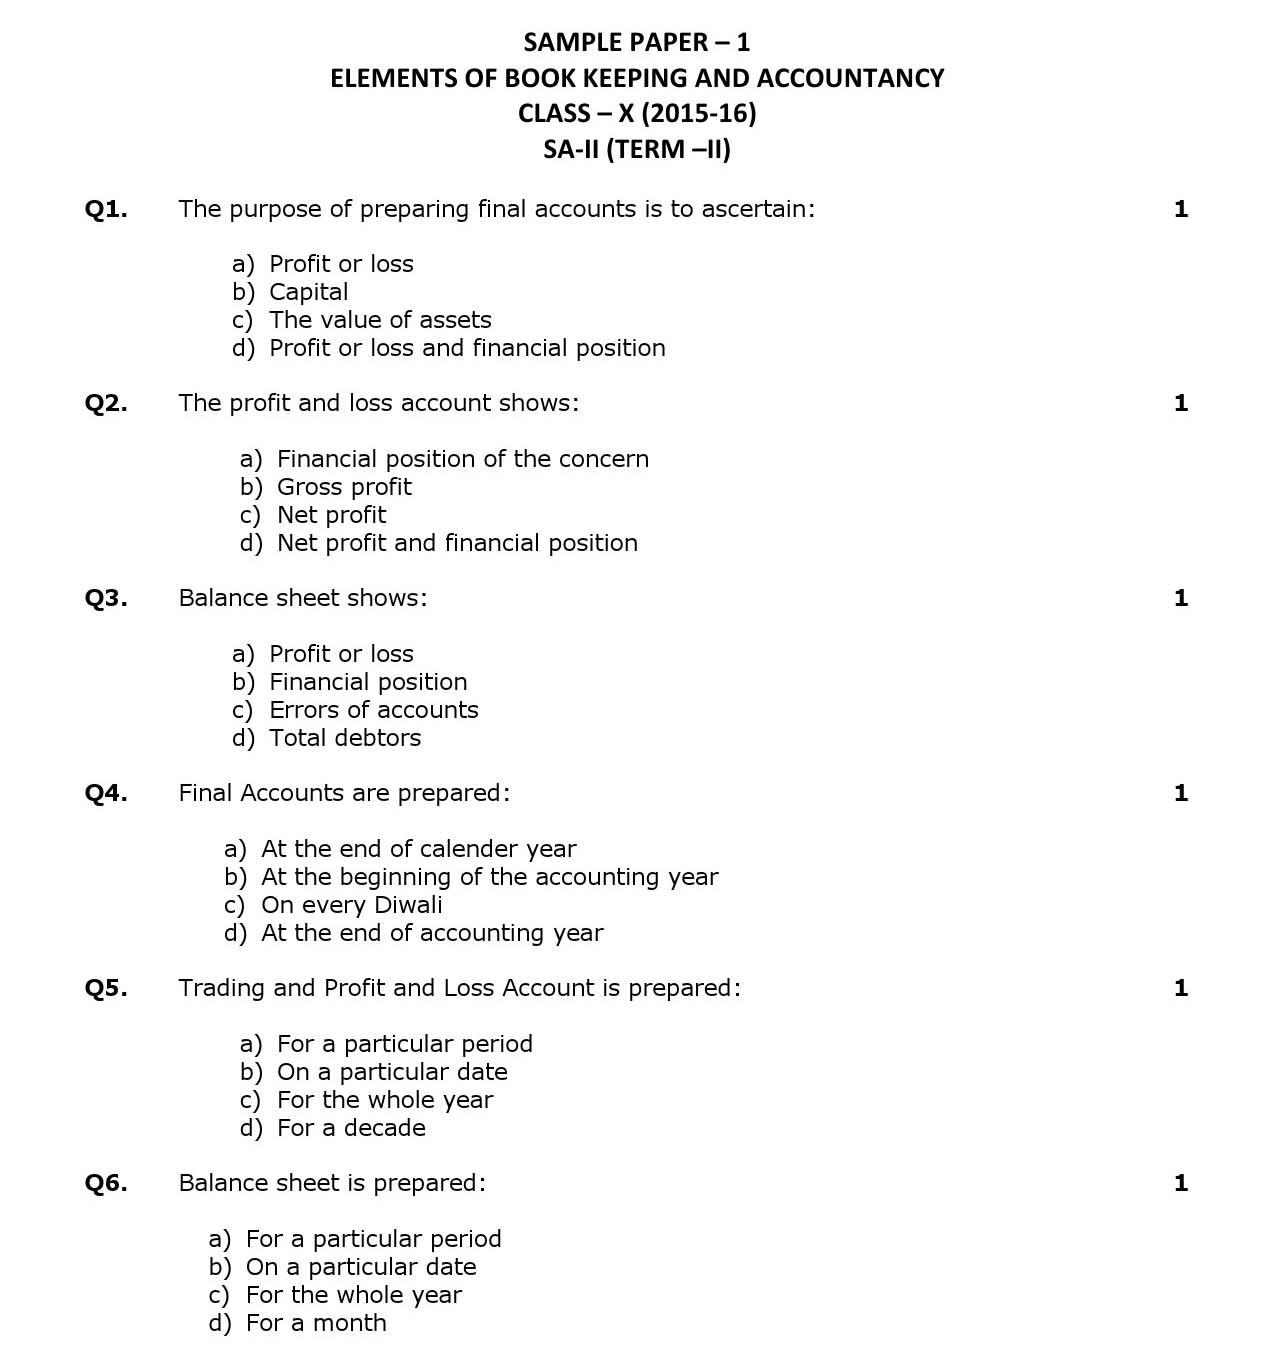 Elements Of Book Keeping And Accountancy CBSE Class X Sample Question Paper 2015 16 - Image 1